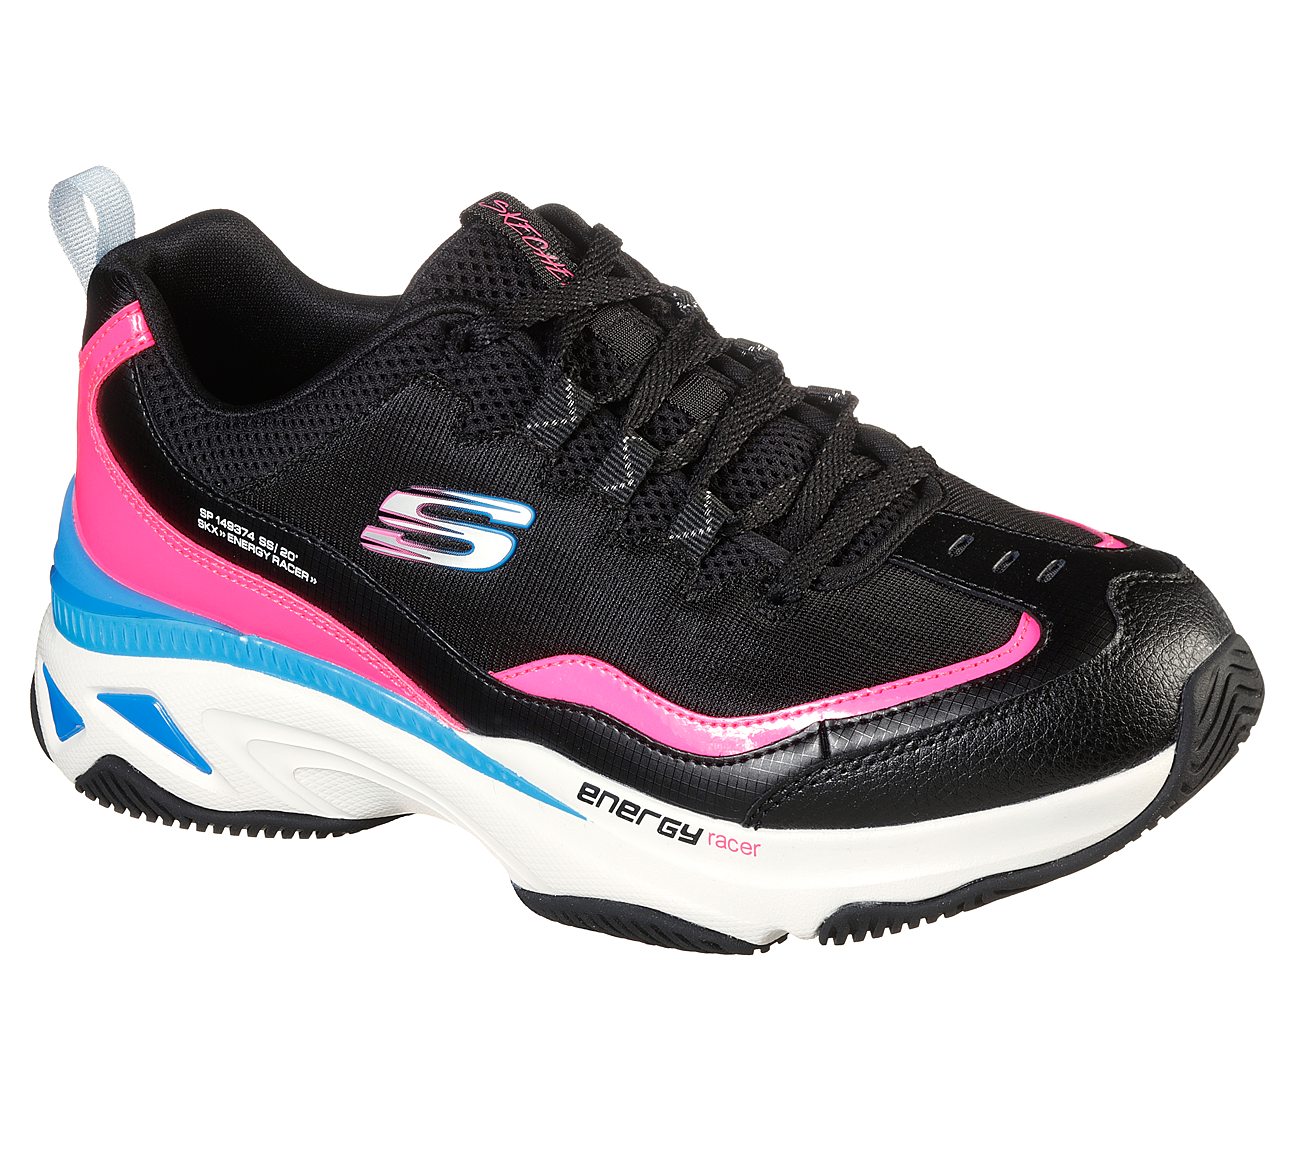 the iconic skechers